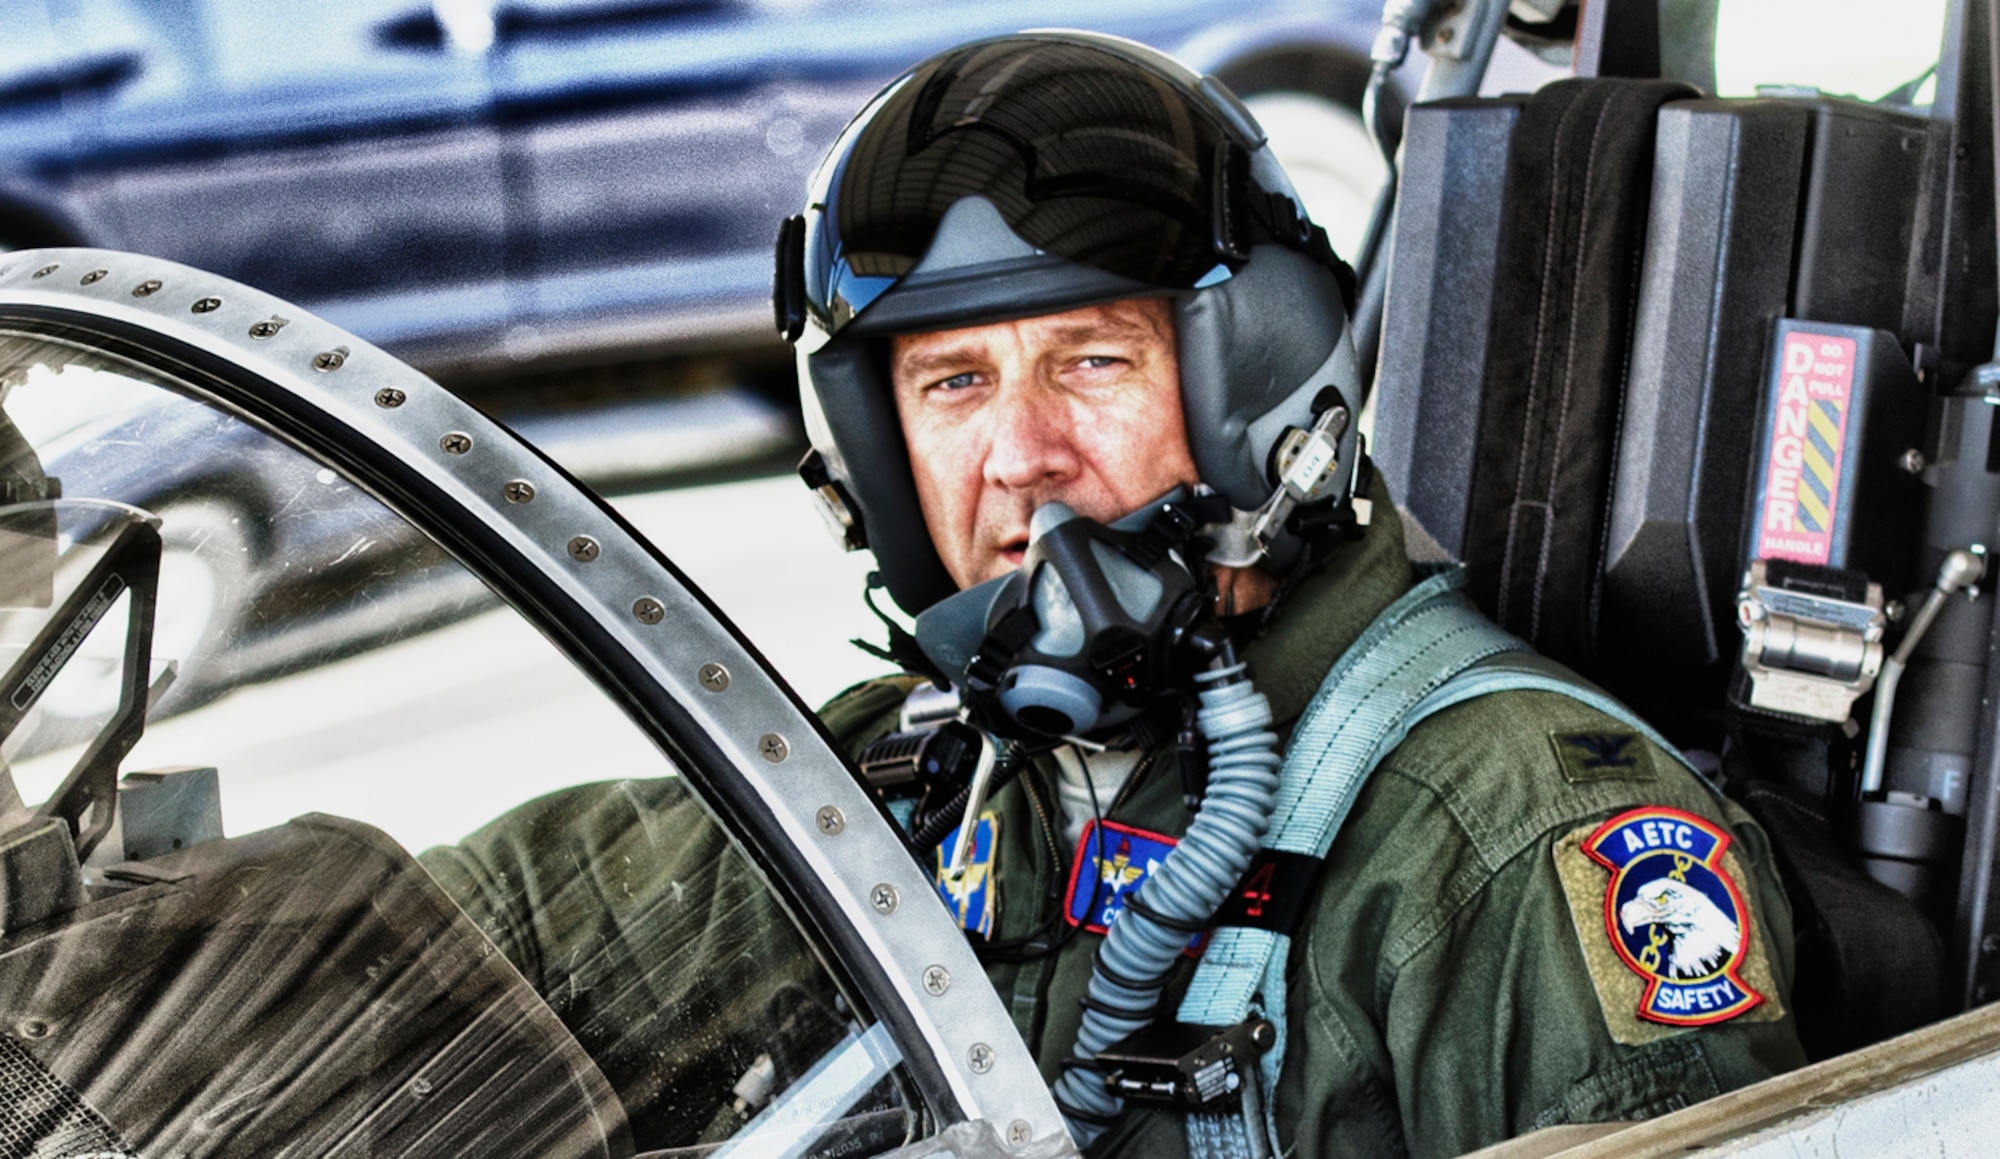 Photo of Col. Creig Rice, Director of Safety, boarding a T-38, Randolph AFB.
(PHOTO BY TSGT SAMUEL BENDET)